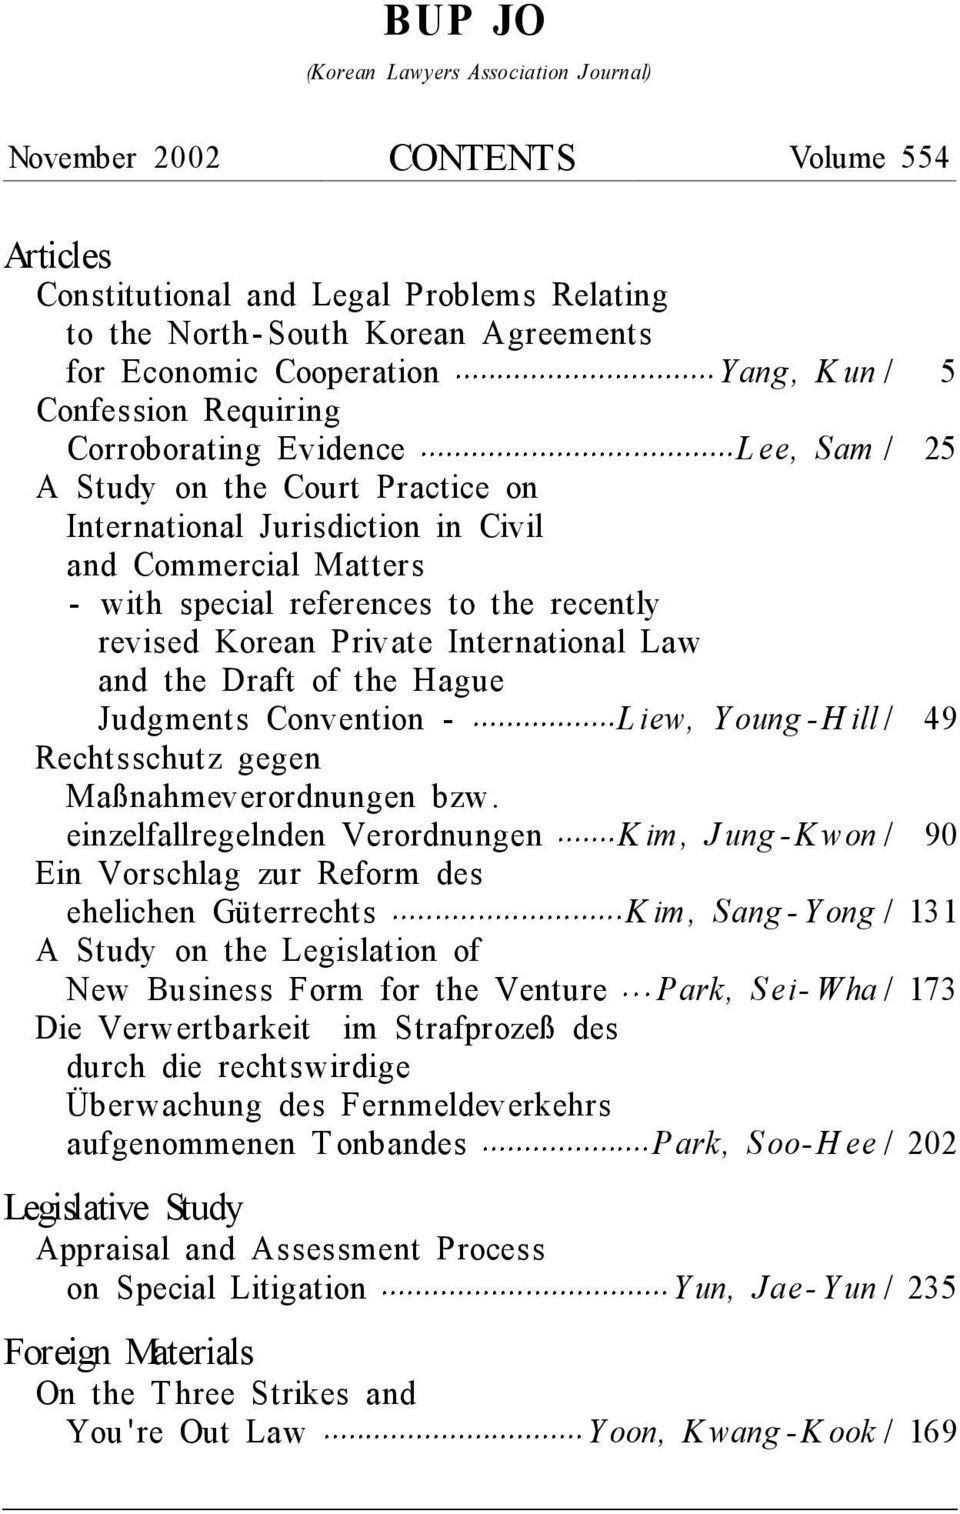 recently revised Korean Private International Law and the Draft of the Hague Judgments Convention - L iew, Y oung -H ill / 49 Rechtsschutz gegen Maßnahmeverordnungen bzw.